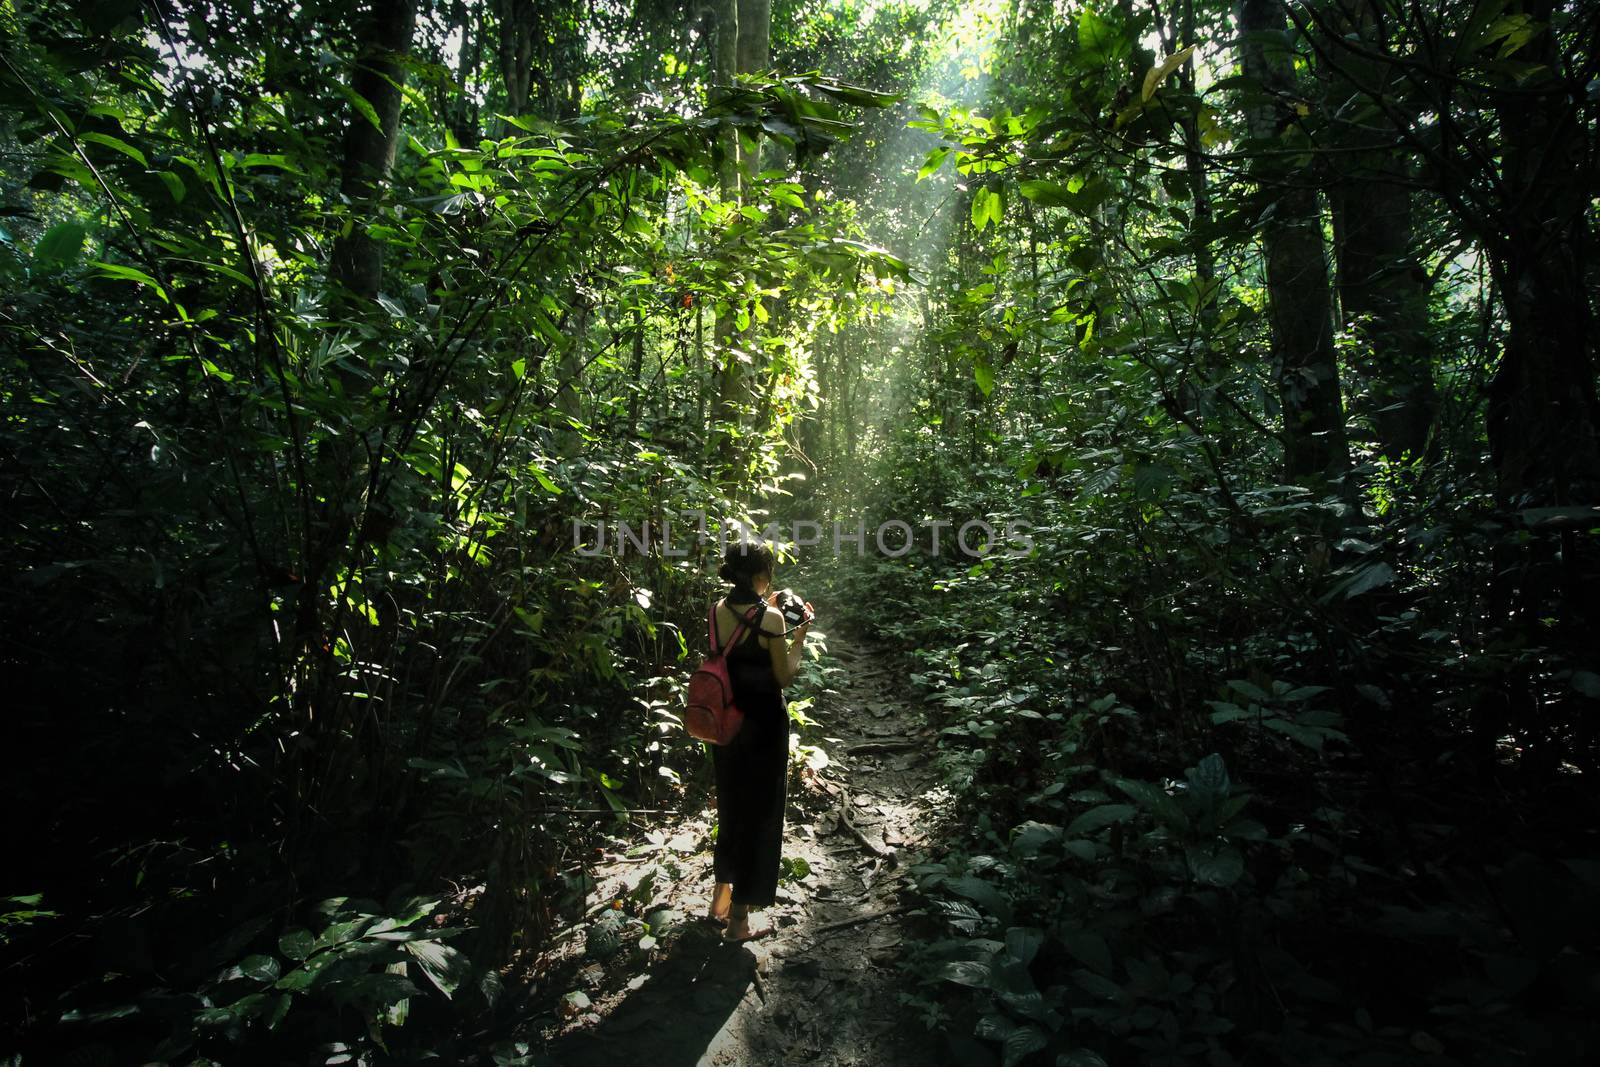 A girl walking among the trees in the forest and illuminated by the sunlight breaking through the foliage